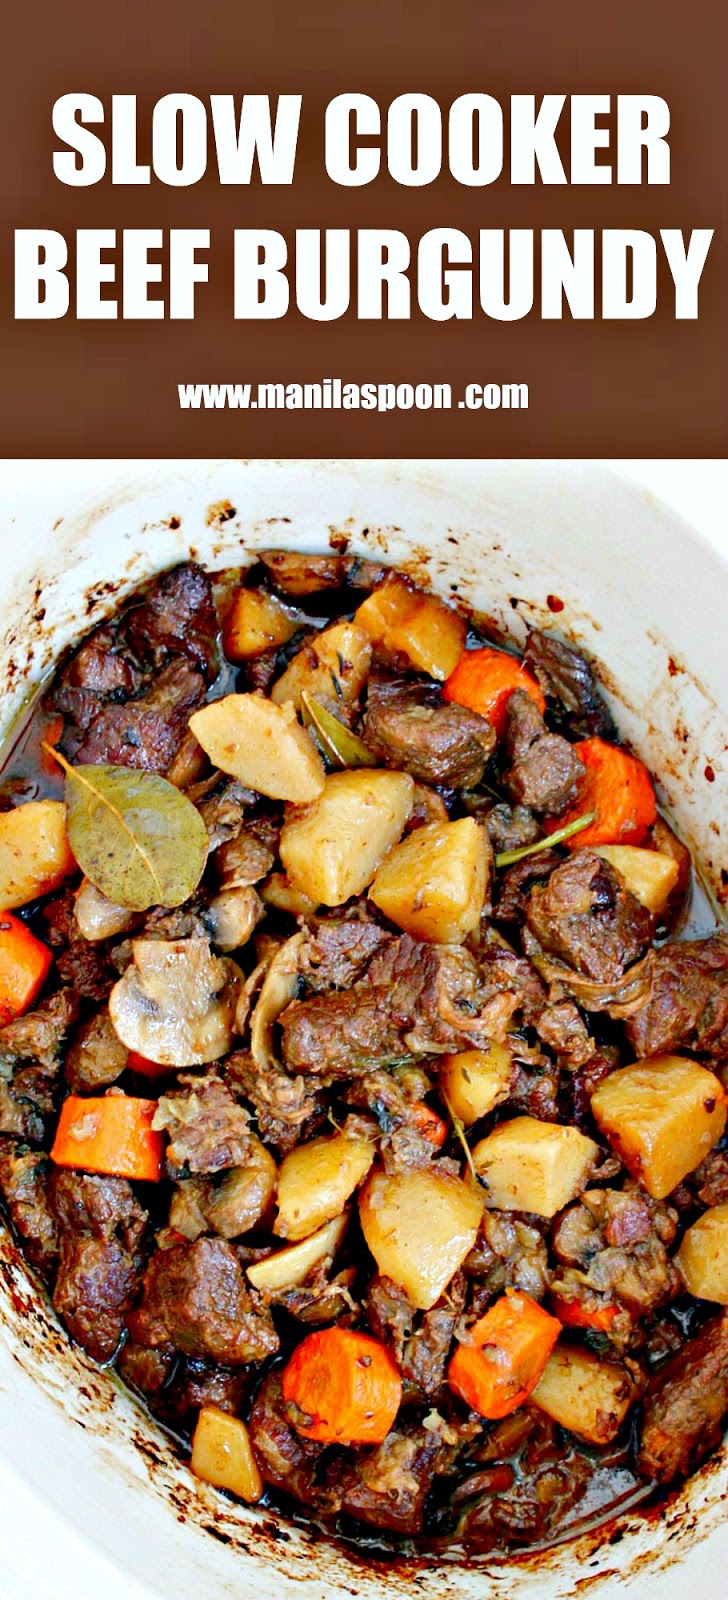 Beef chunks are simmered in red wine in the slow cooker and results in a melt-in-your-mouth delicious stew! Make this crockpot version of the classic French stew - Beef Burgundy (Boeuf Bourguignon) in the morning and enjoy it for dinner. | manilaspoon.com